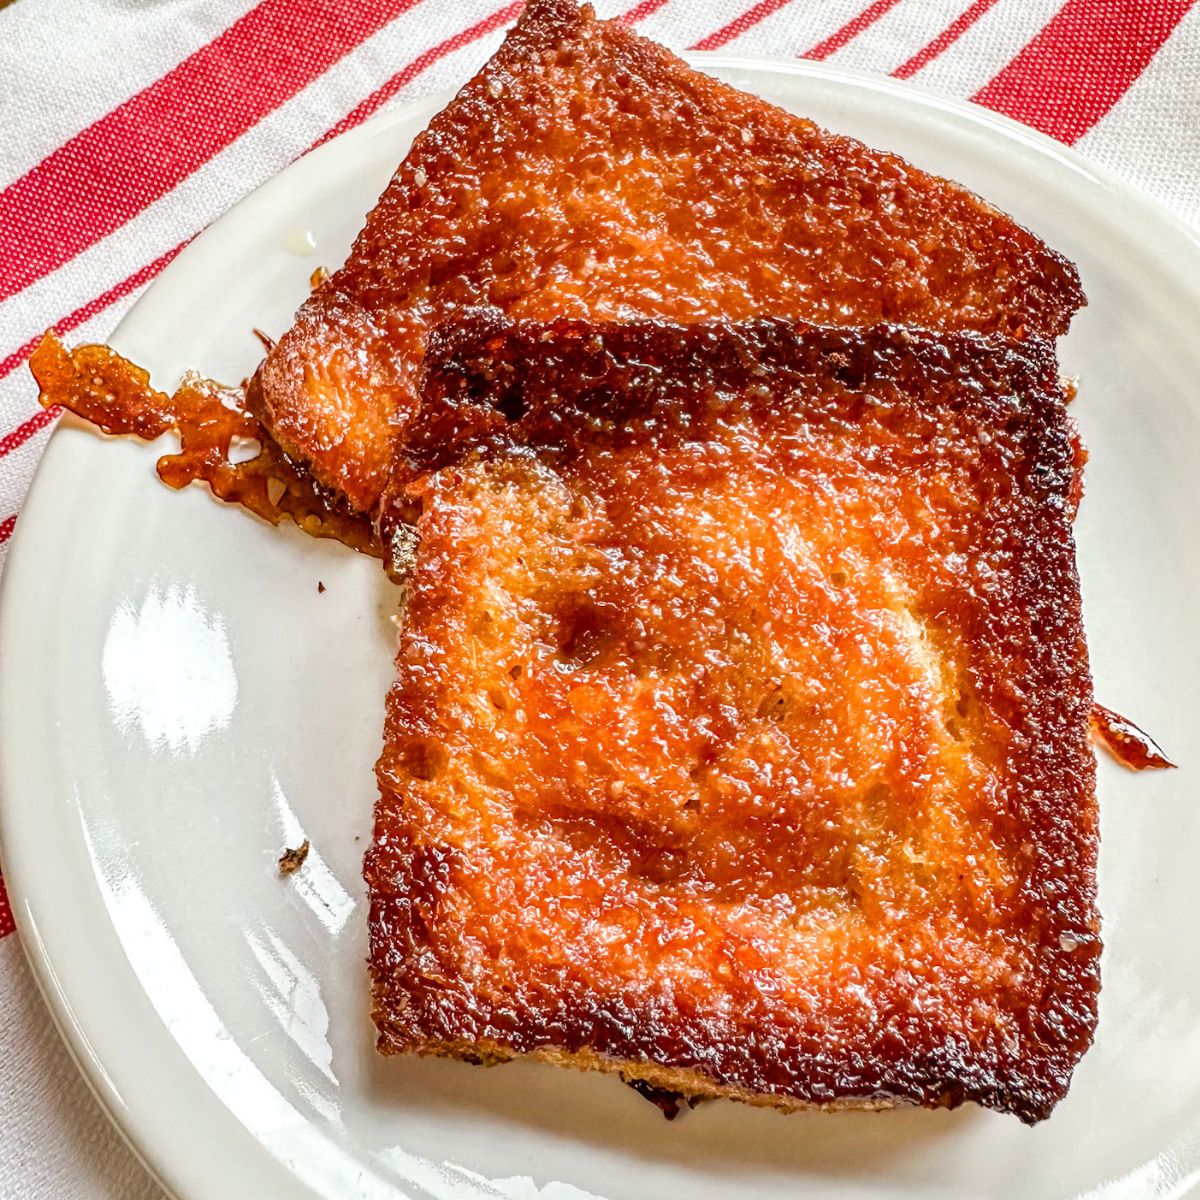 caramelized honey butter toast on a white plate on a red and white table cloth.